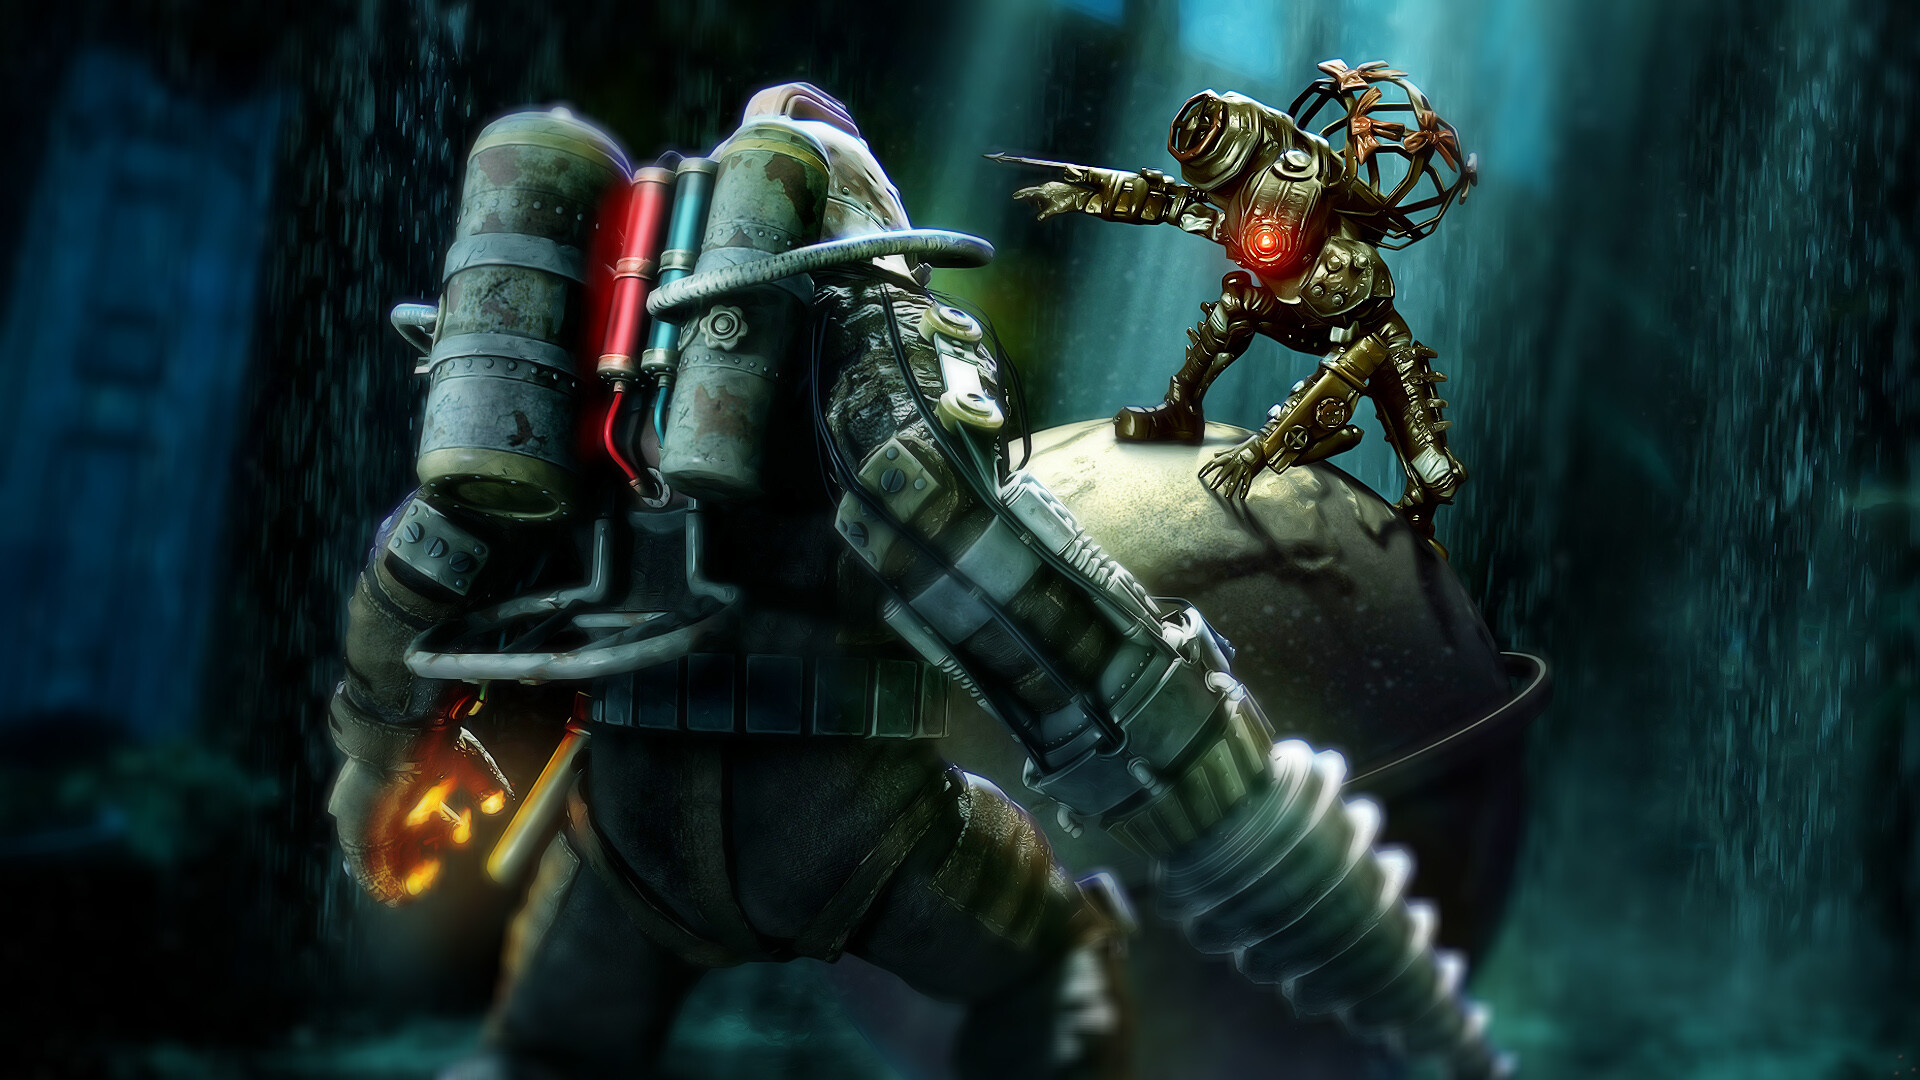 BioShock: Big Daddies, Genetically enhanced human beings who have had their skin and organs grafted into an armored diving suit. 1920x1080 Full HD Wallpaper.